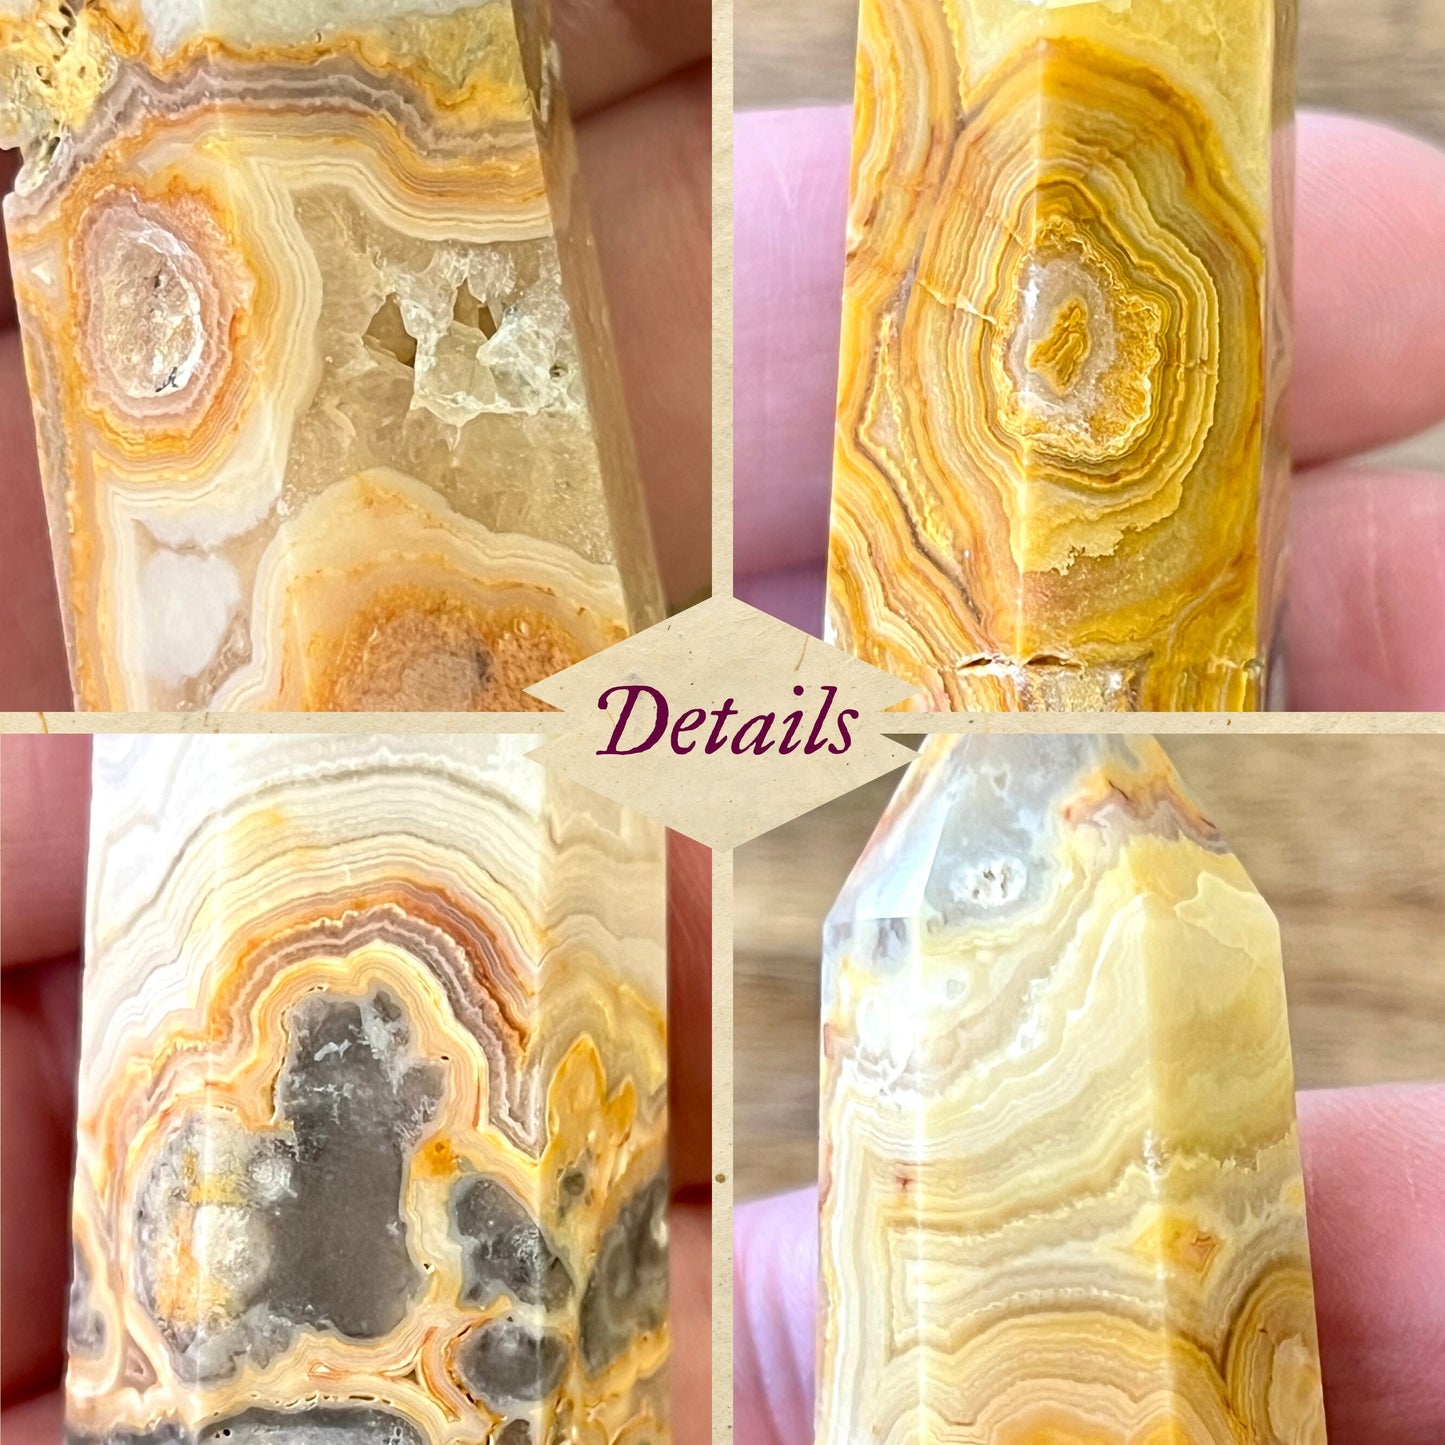 Crazy Lace Agate Crystal Tower - You get one